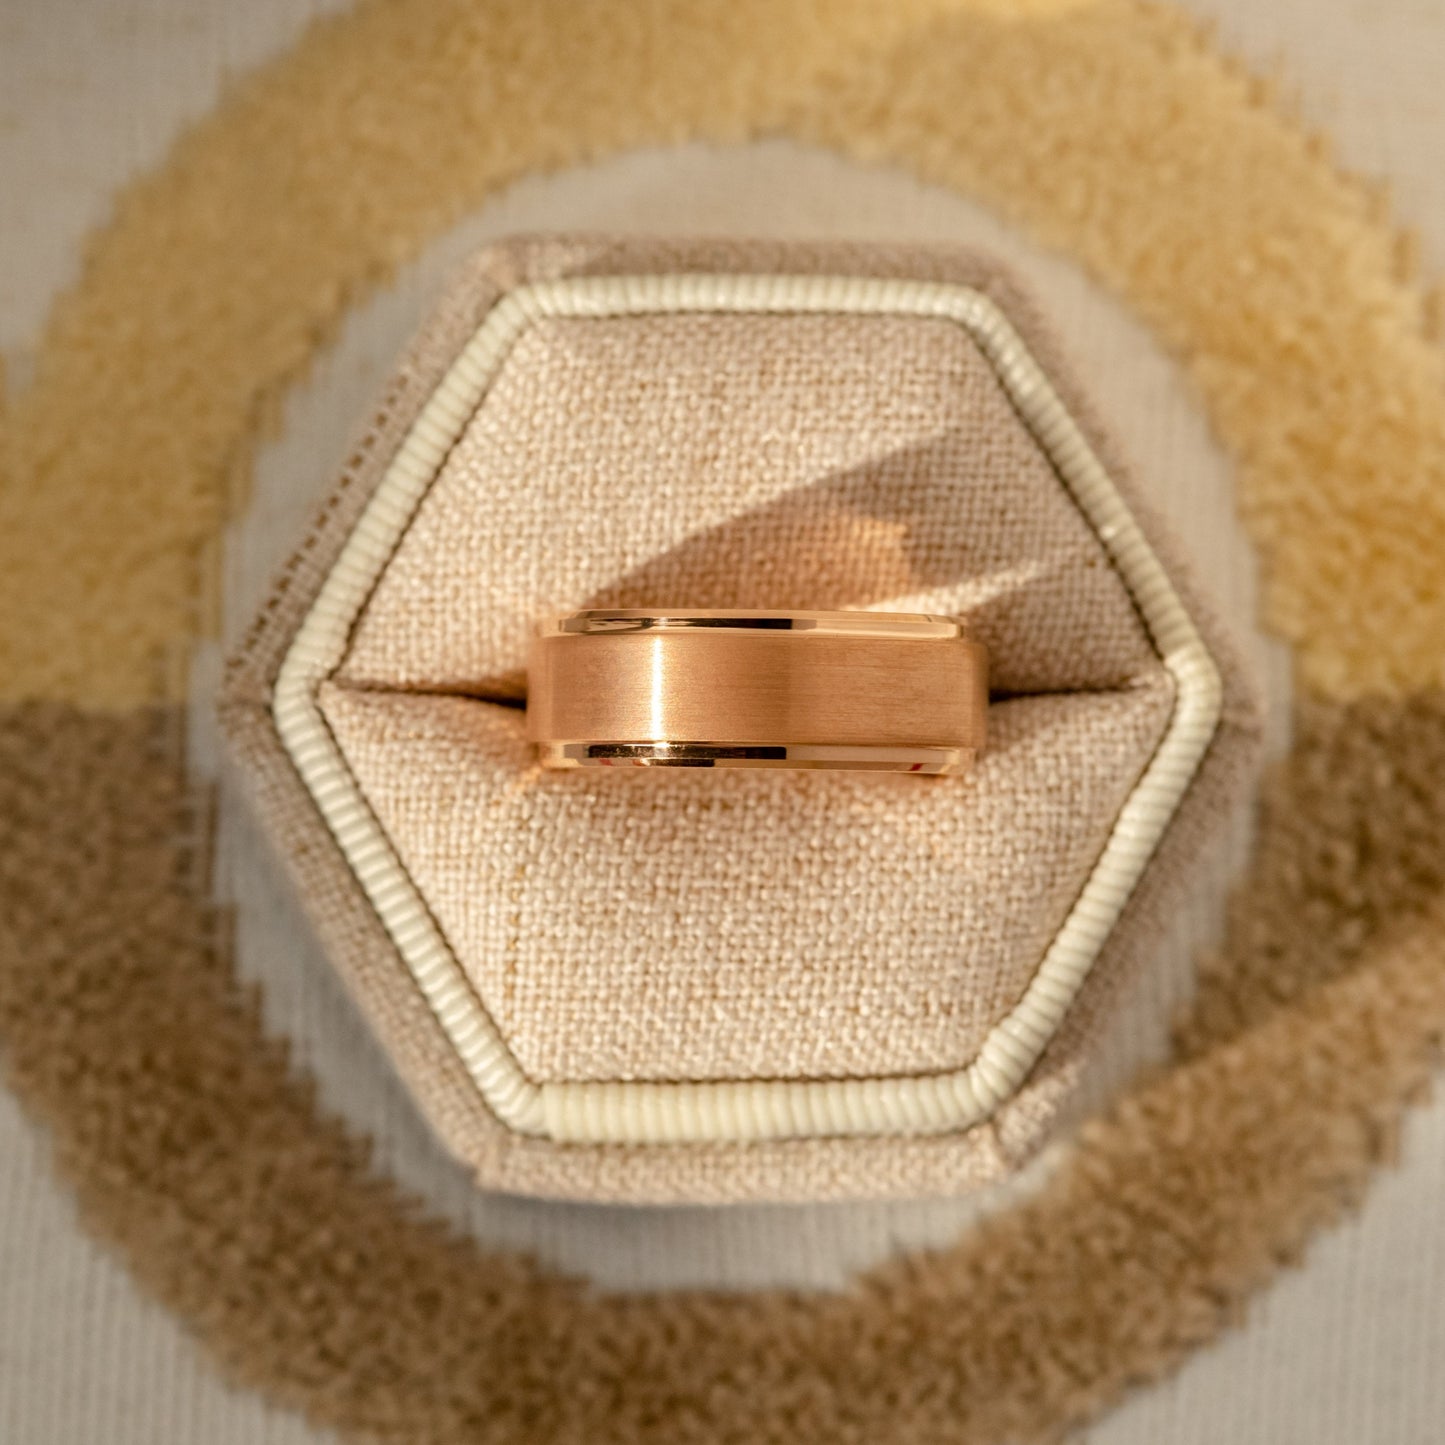 Rose Gold Grooved Tungsten Ring